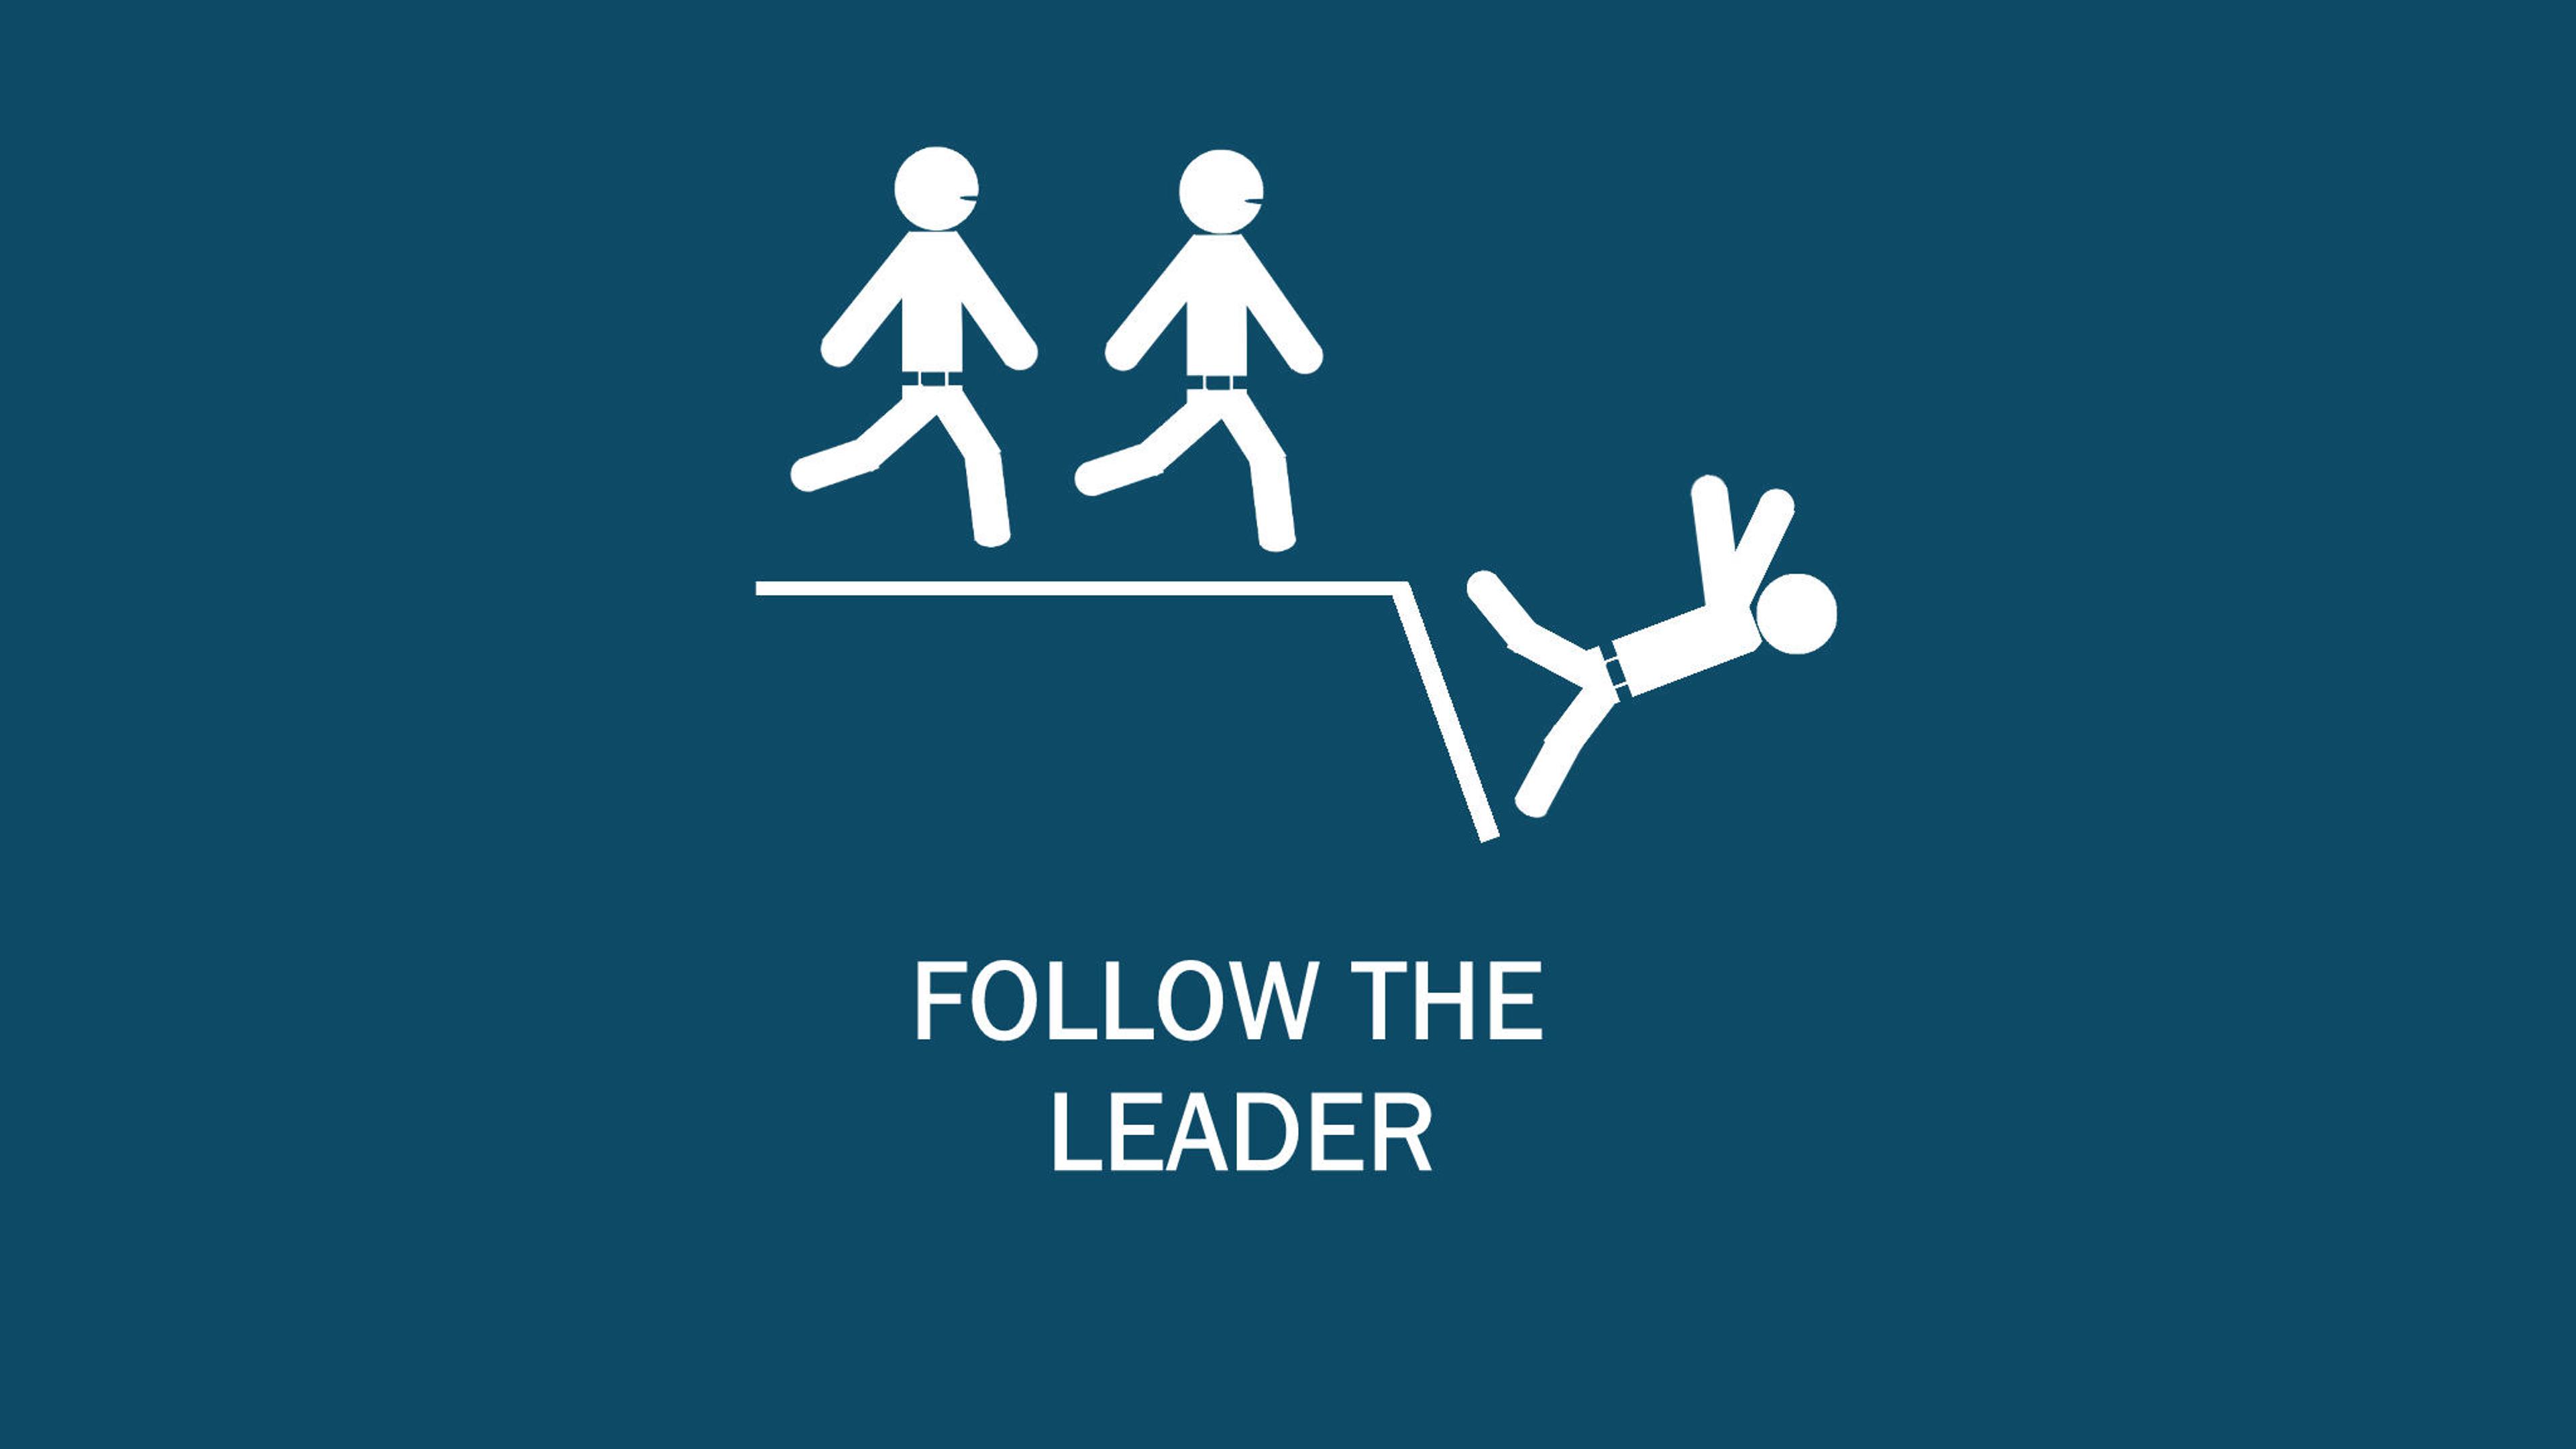 Follow the leader - Funny wallpaper